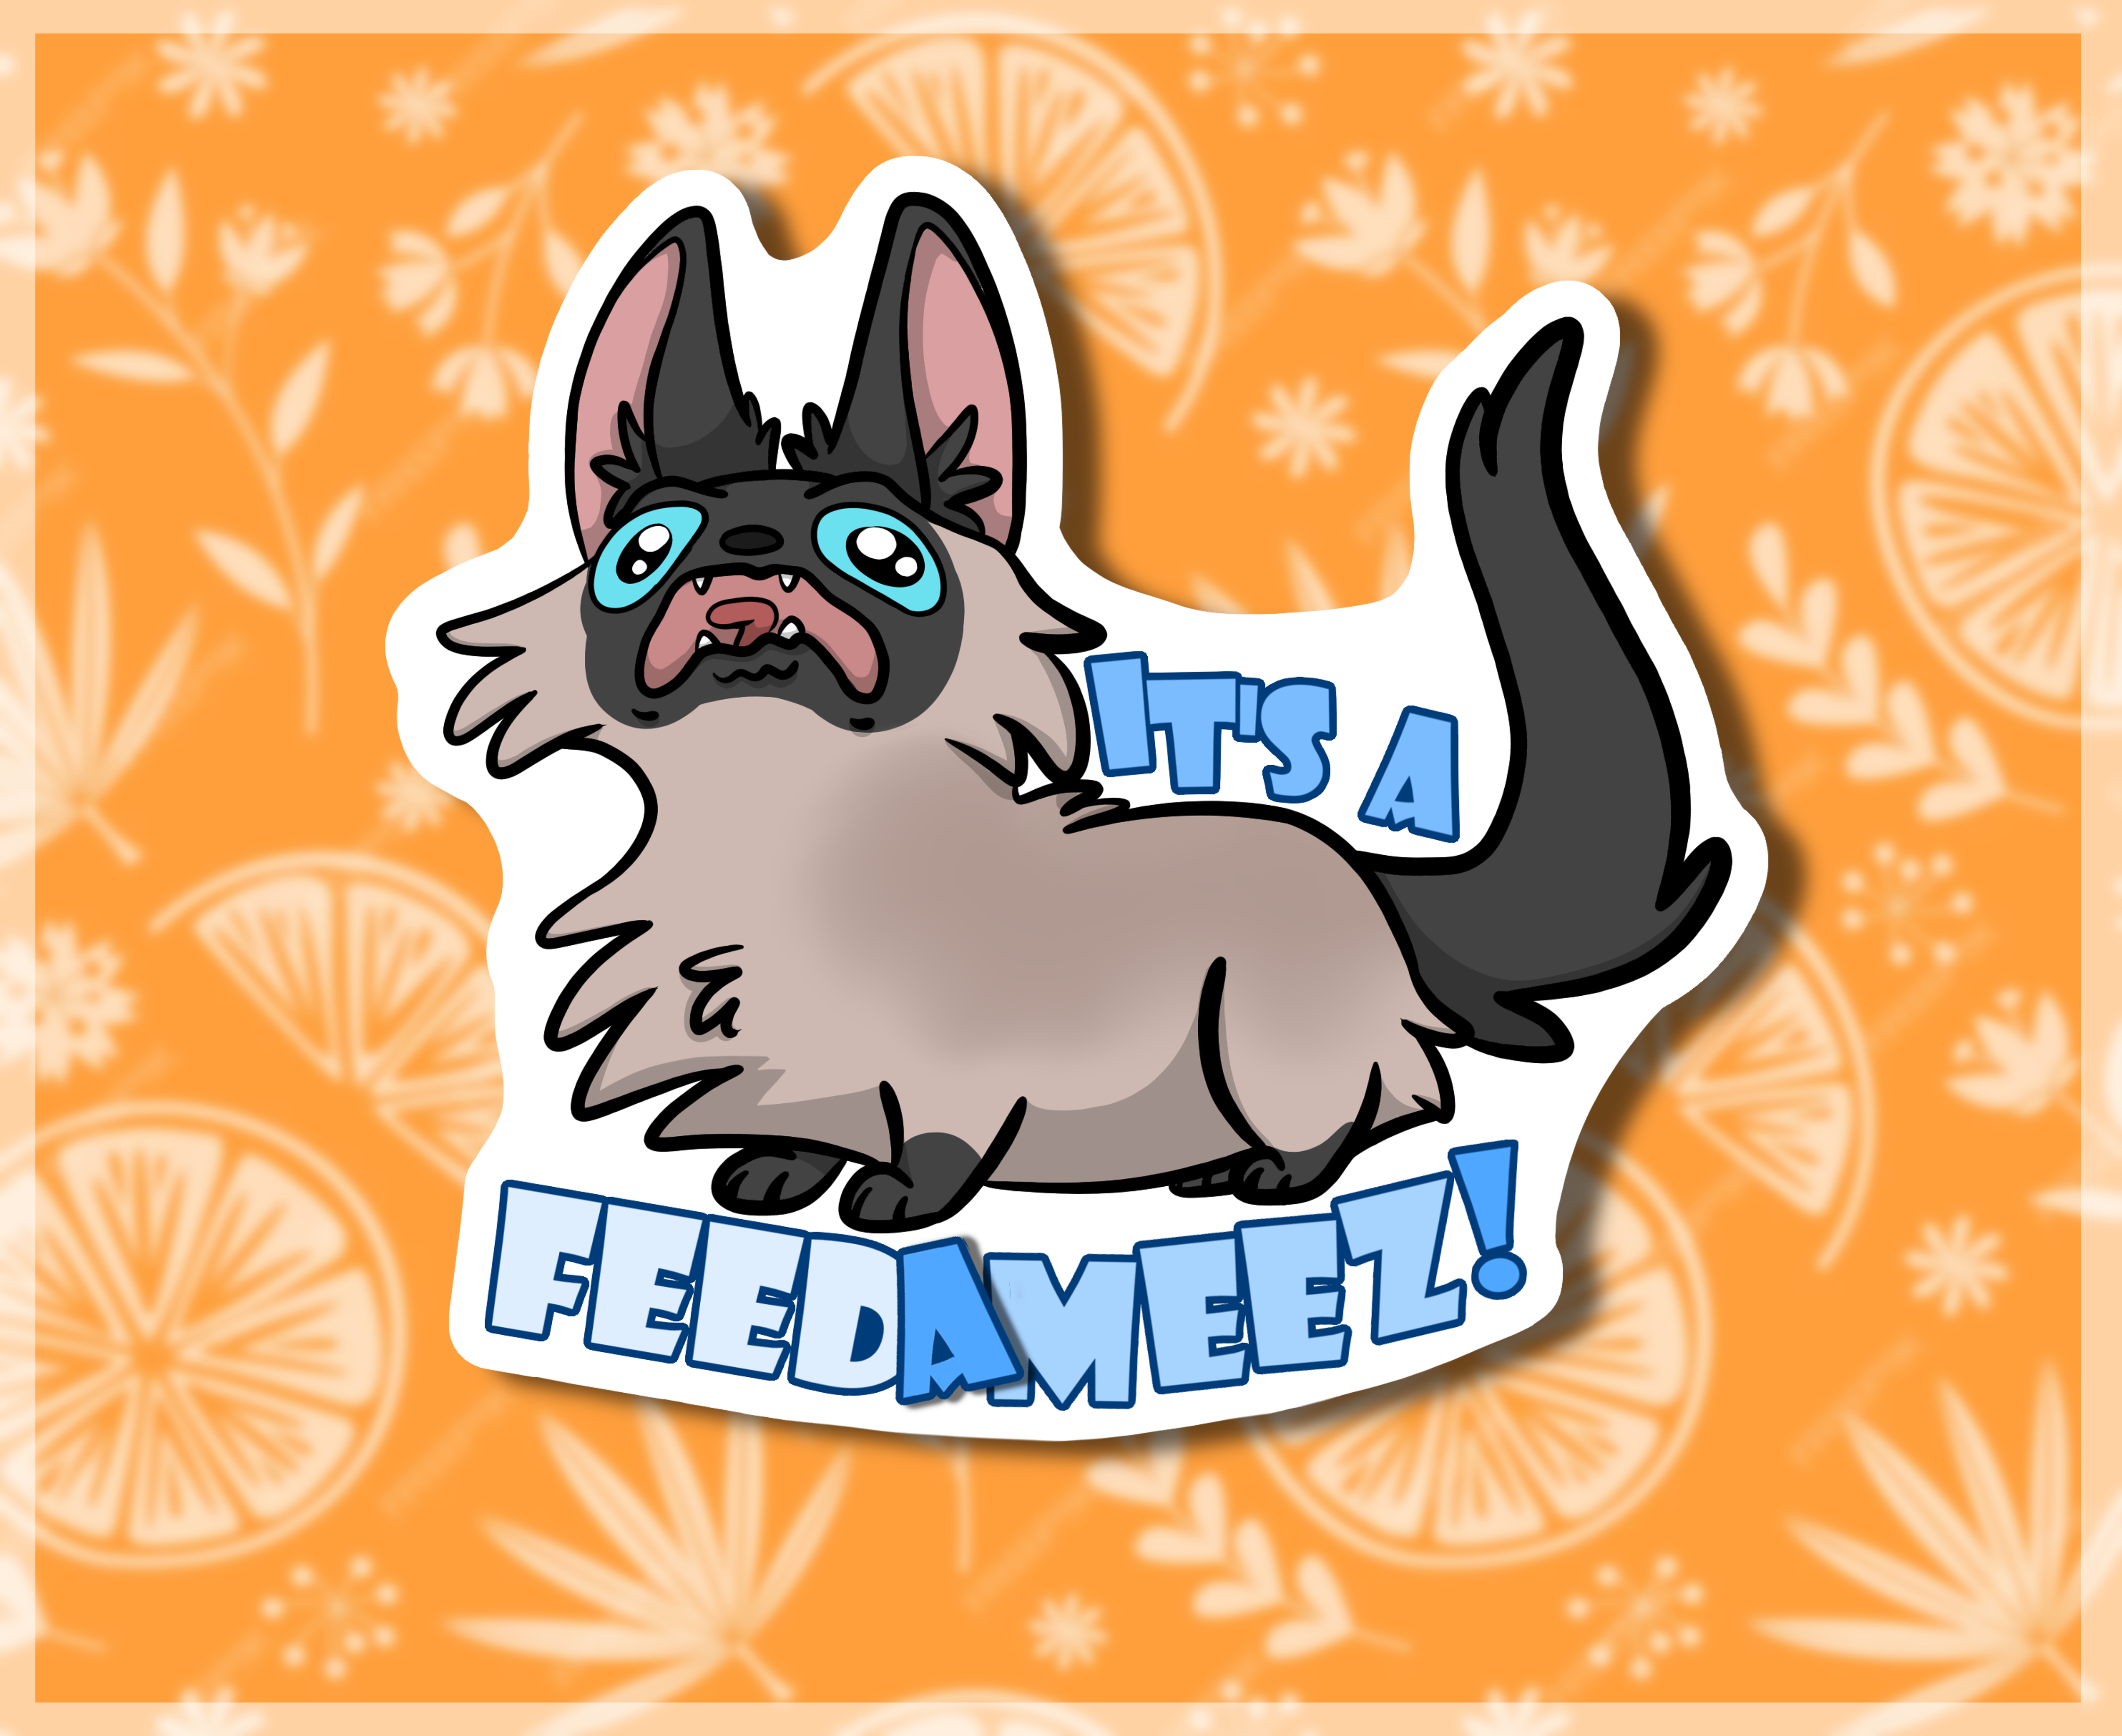 Feed A Meez.png